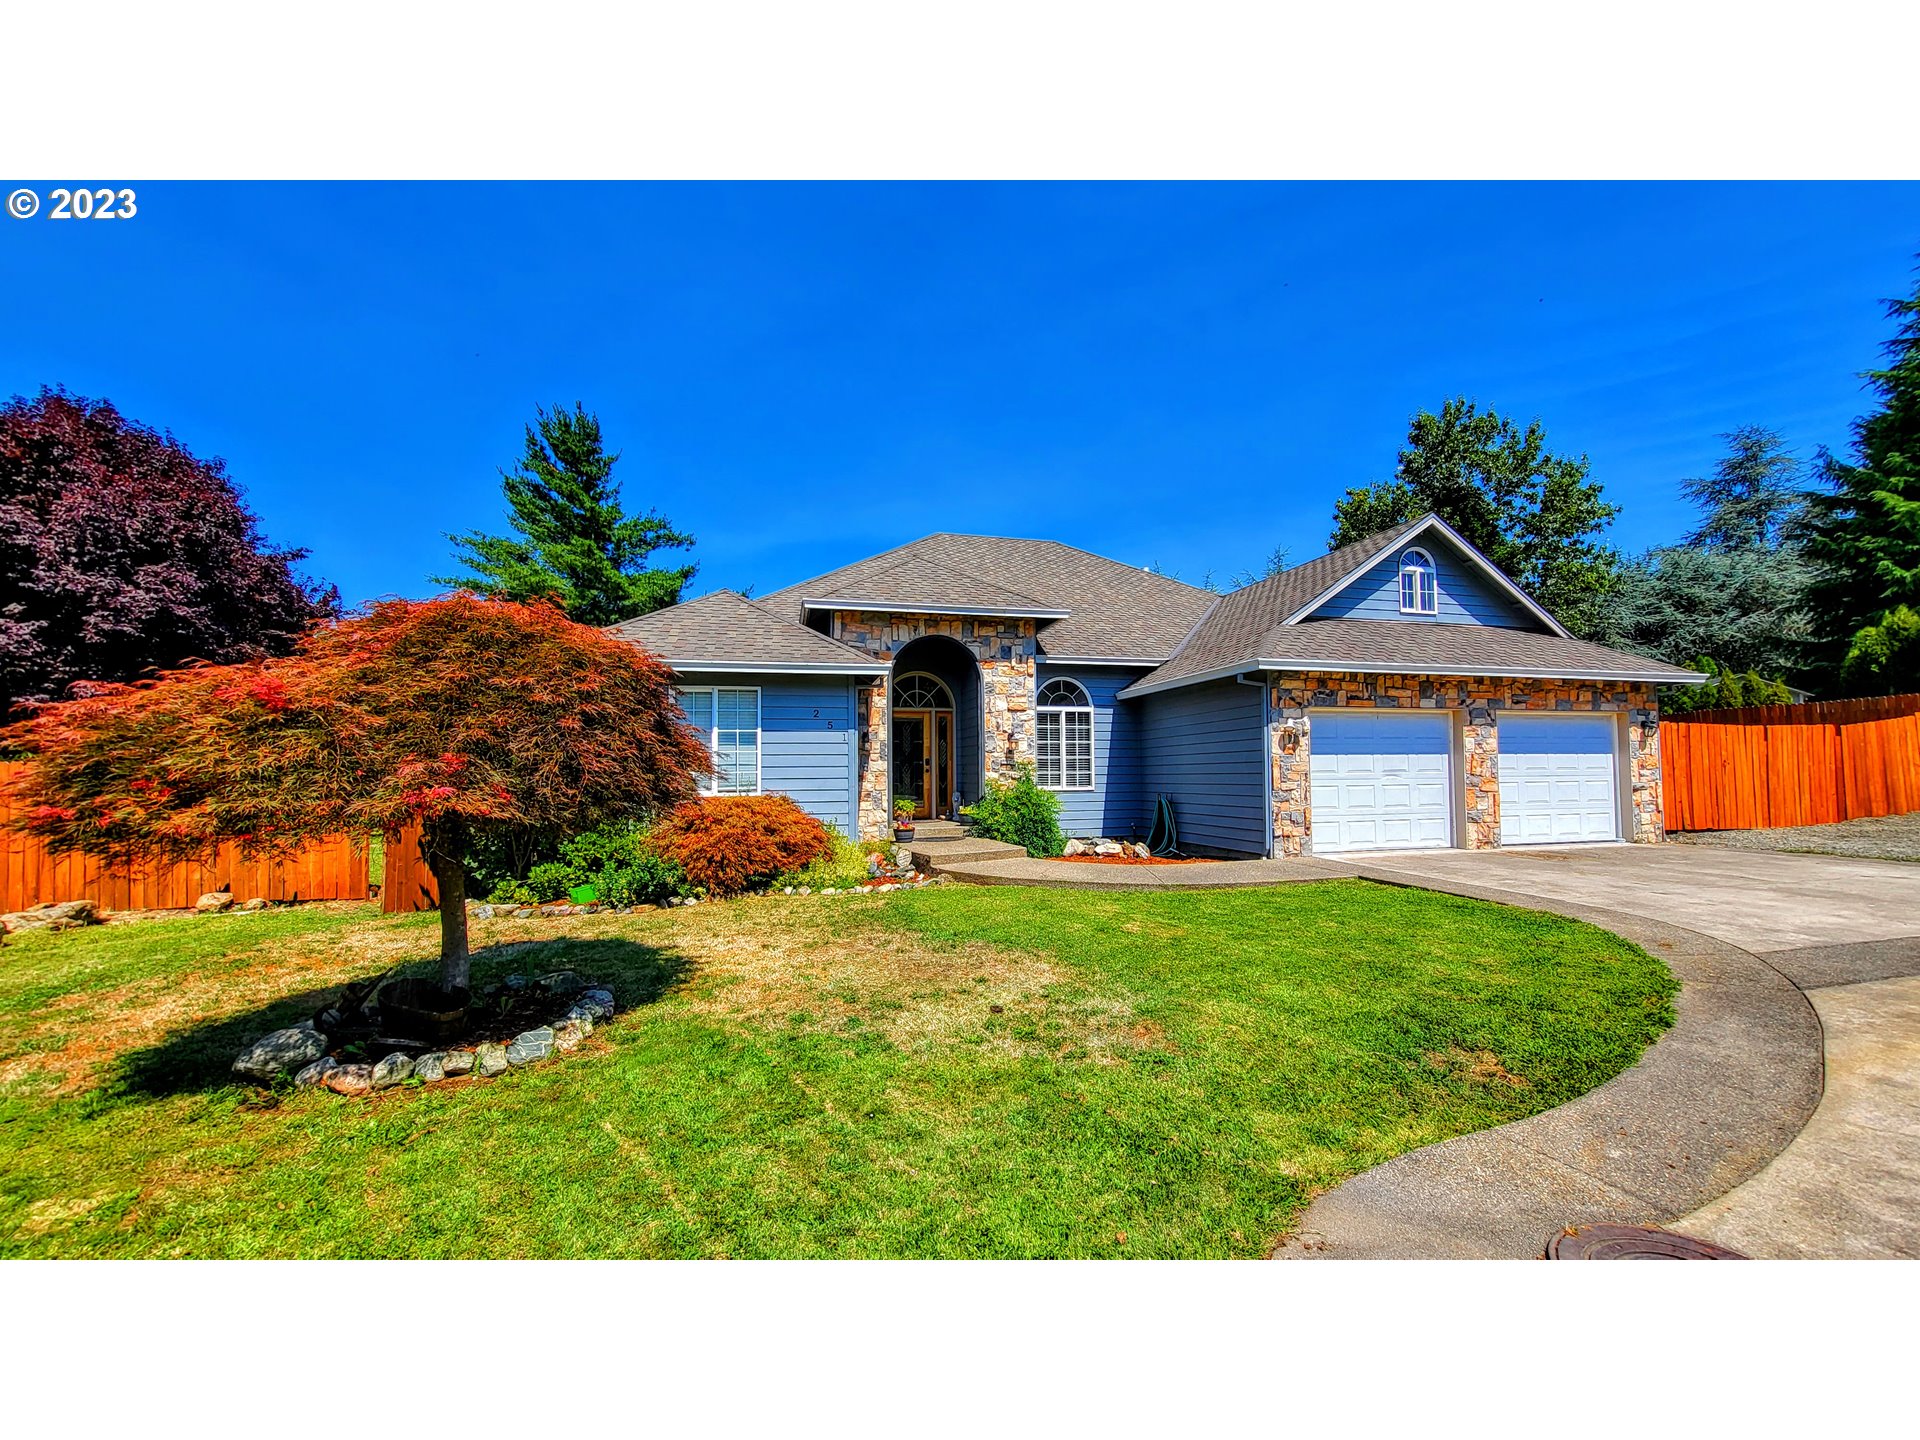 251 MARTHA DR, Winchester, OR 